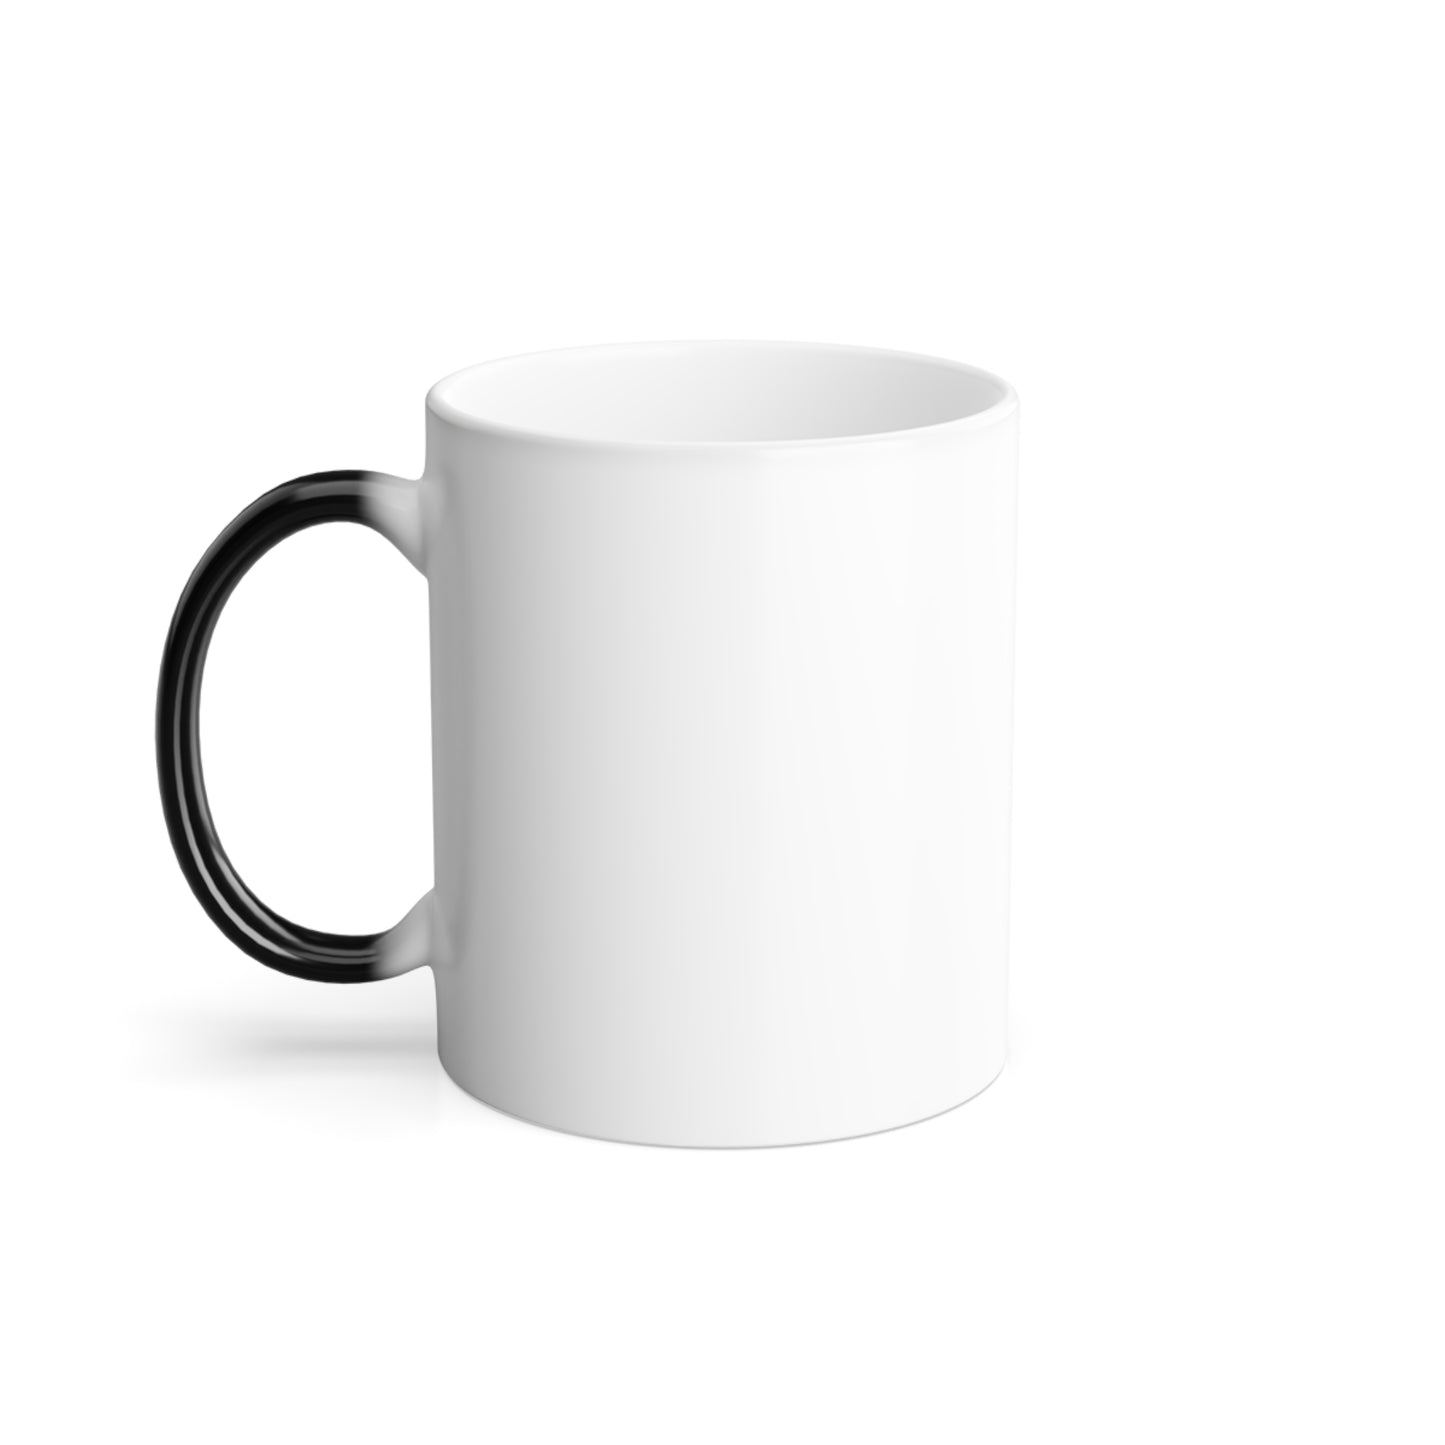 Drummers are the Backbone | Colour Morphing Mug, 11oz